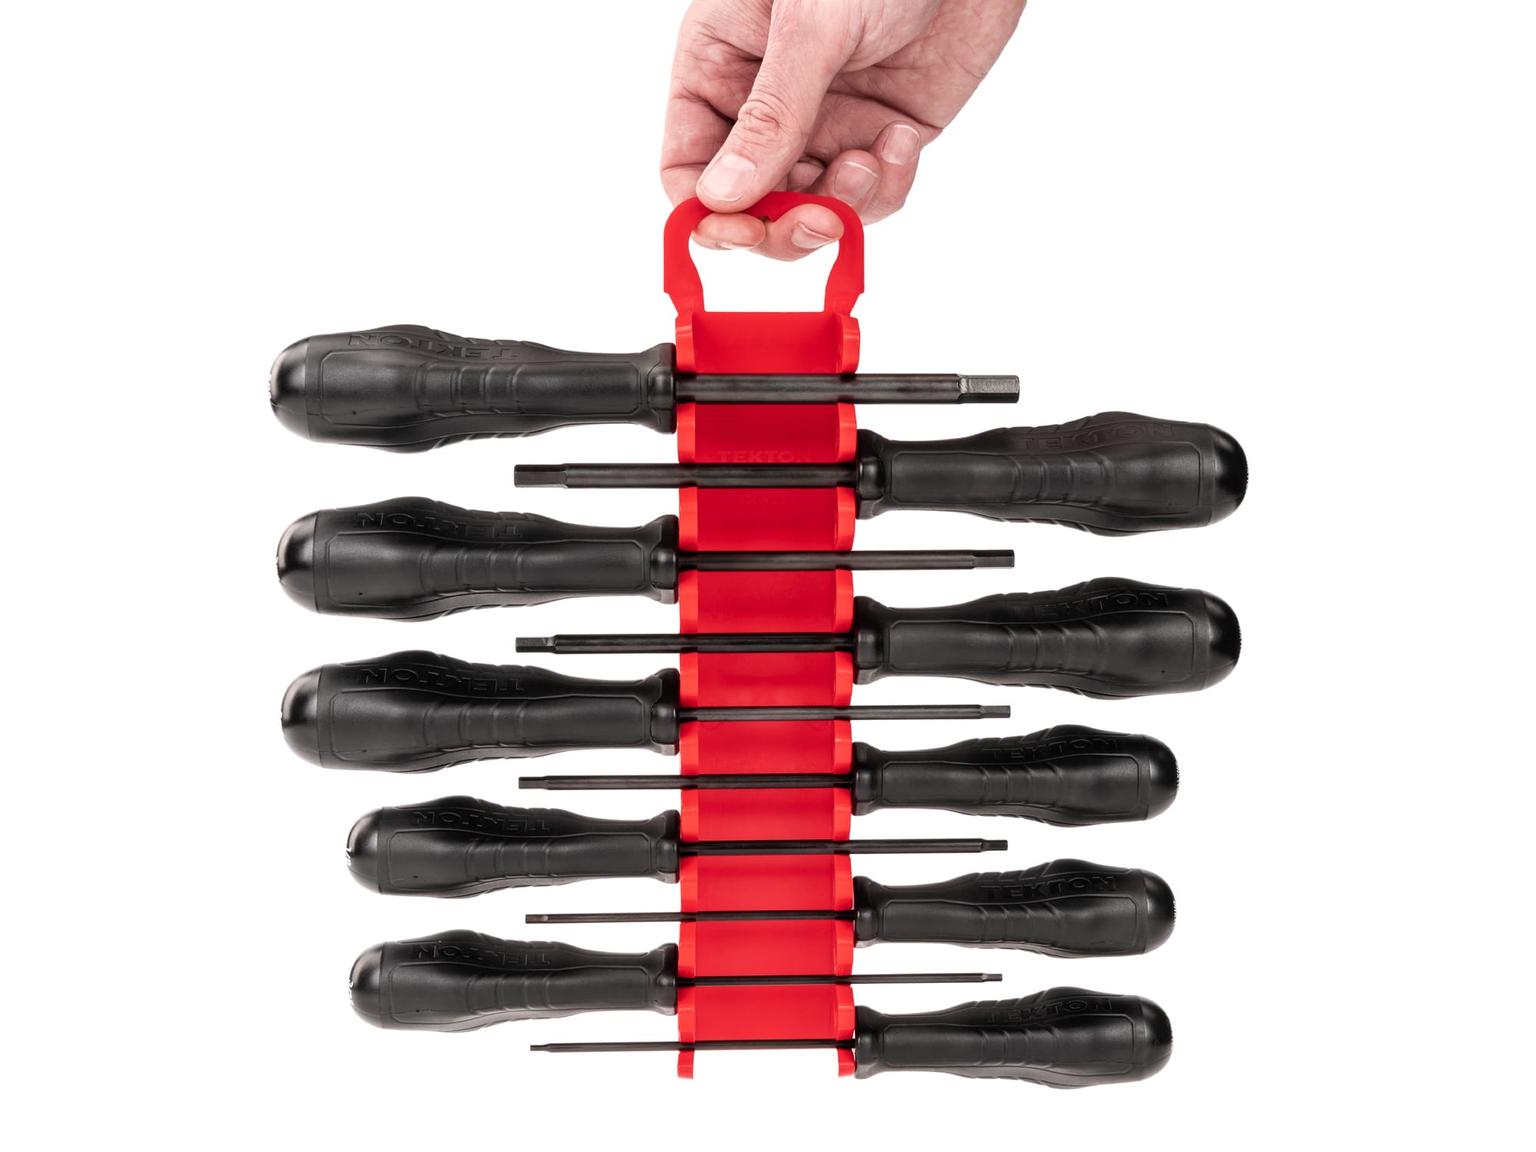 TEKTON DHX92101-T Hex High-Torque Black Oxide Blade Screwdriver Set with Holder, 10-Piece (5/64-5/16 in.)